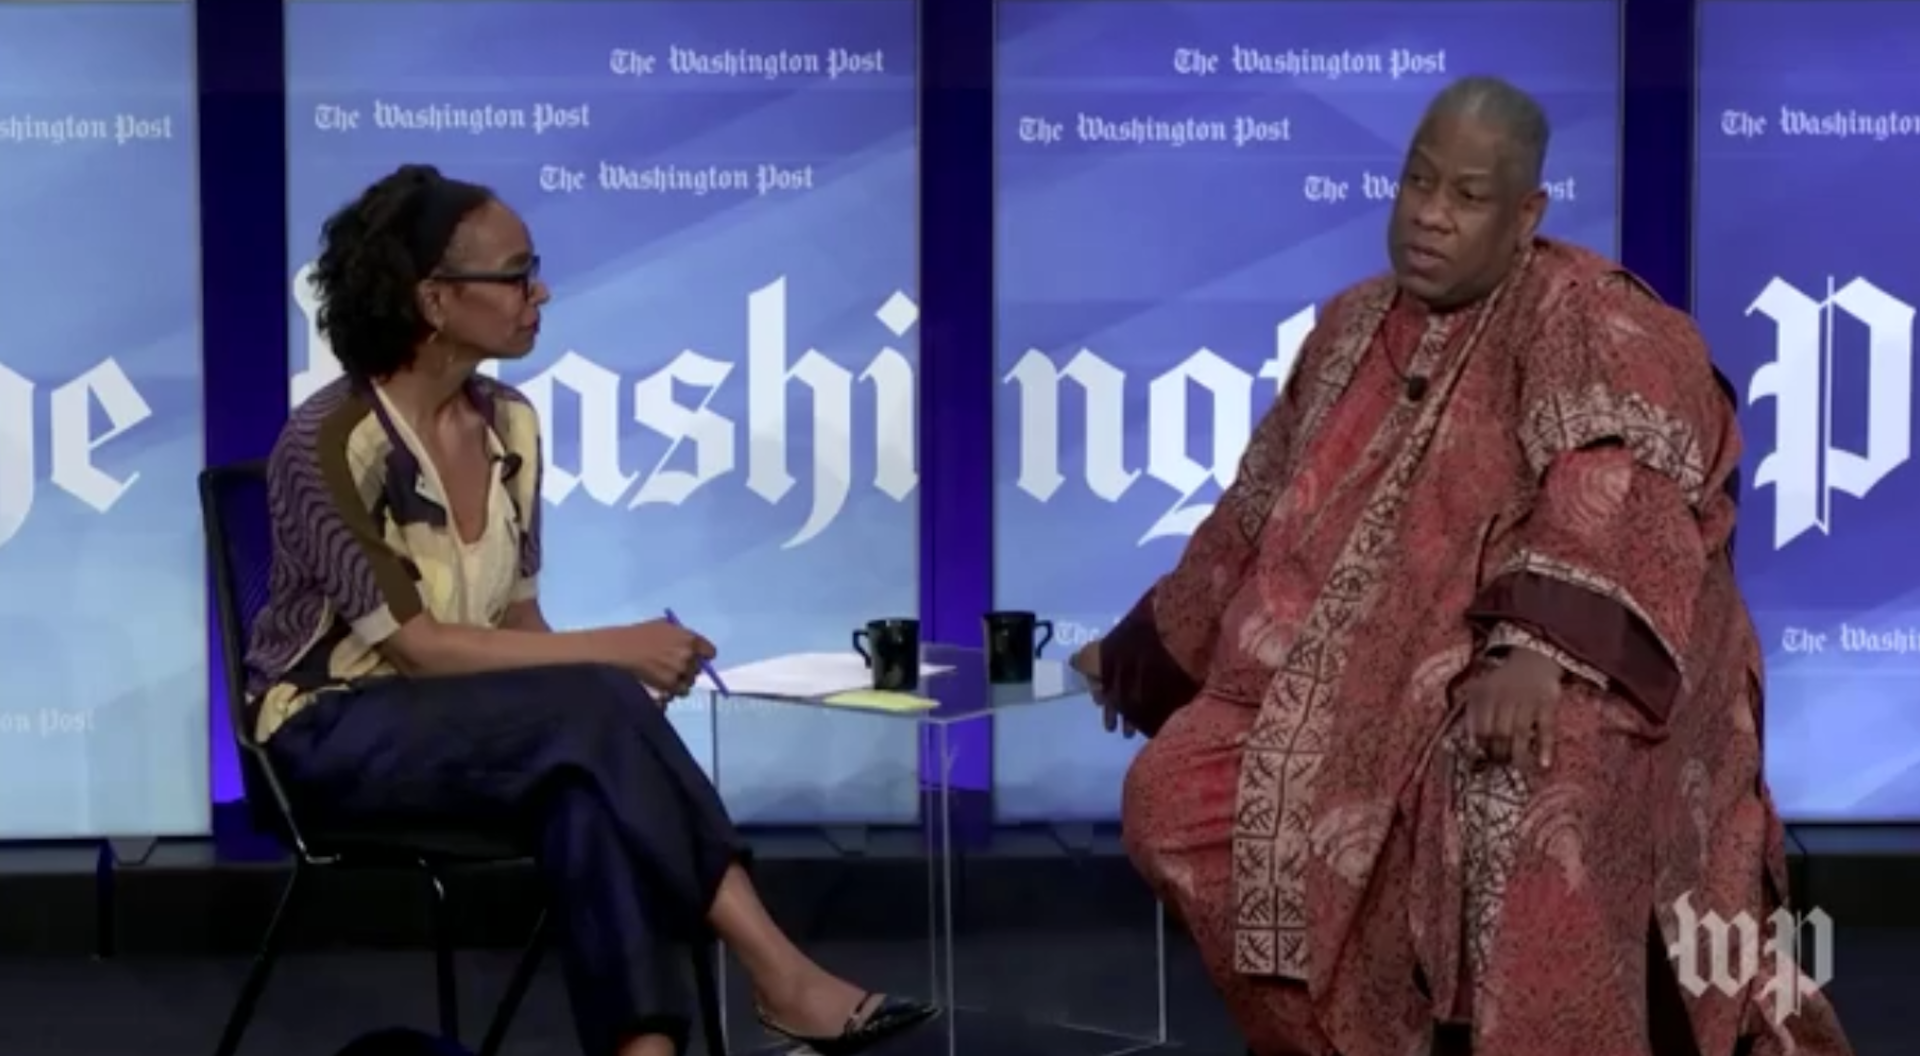 Vogue' fashion journalist and icon André Leon Talley has died at